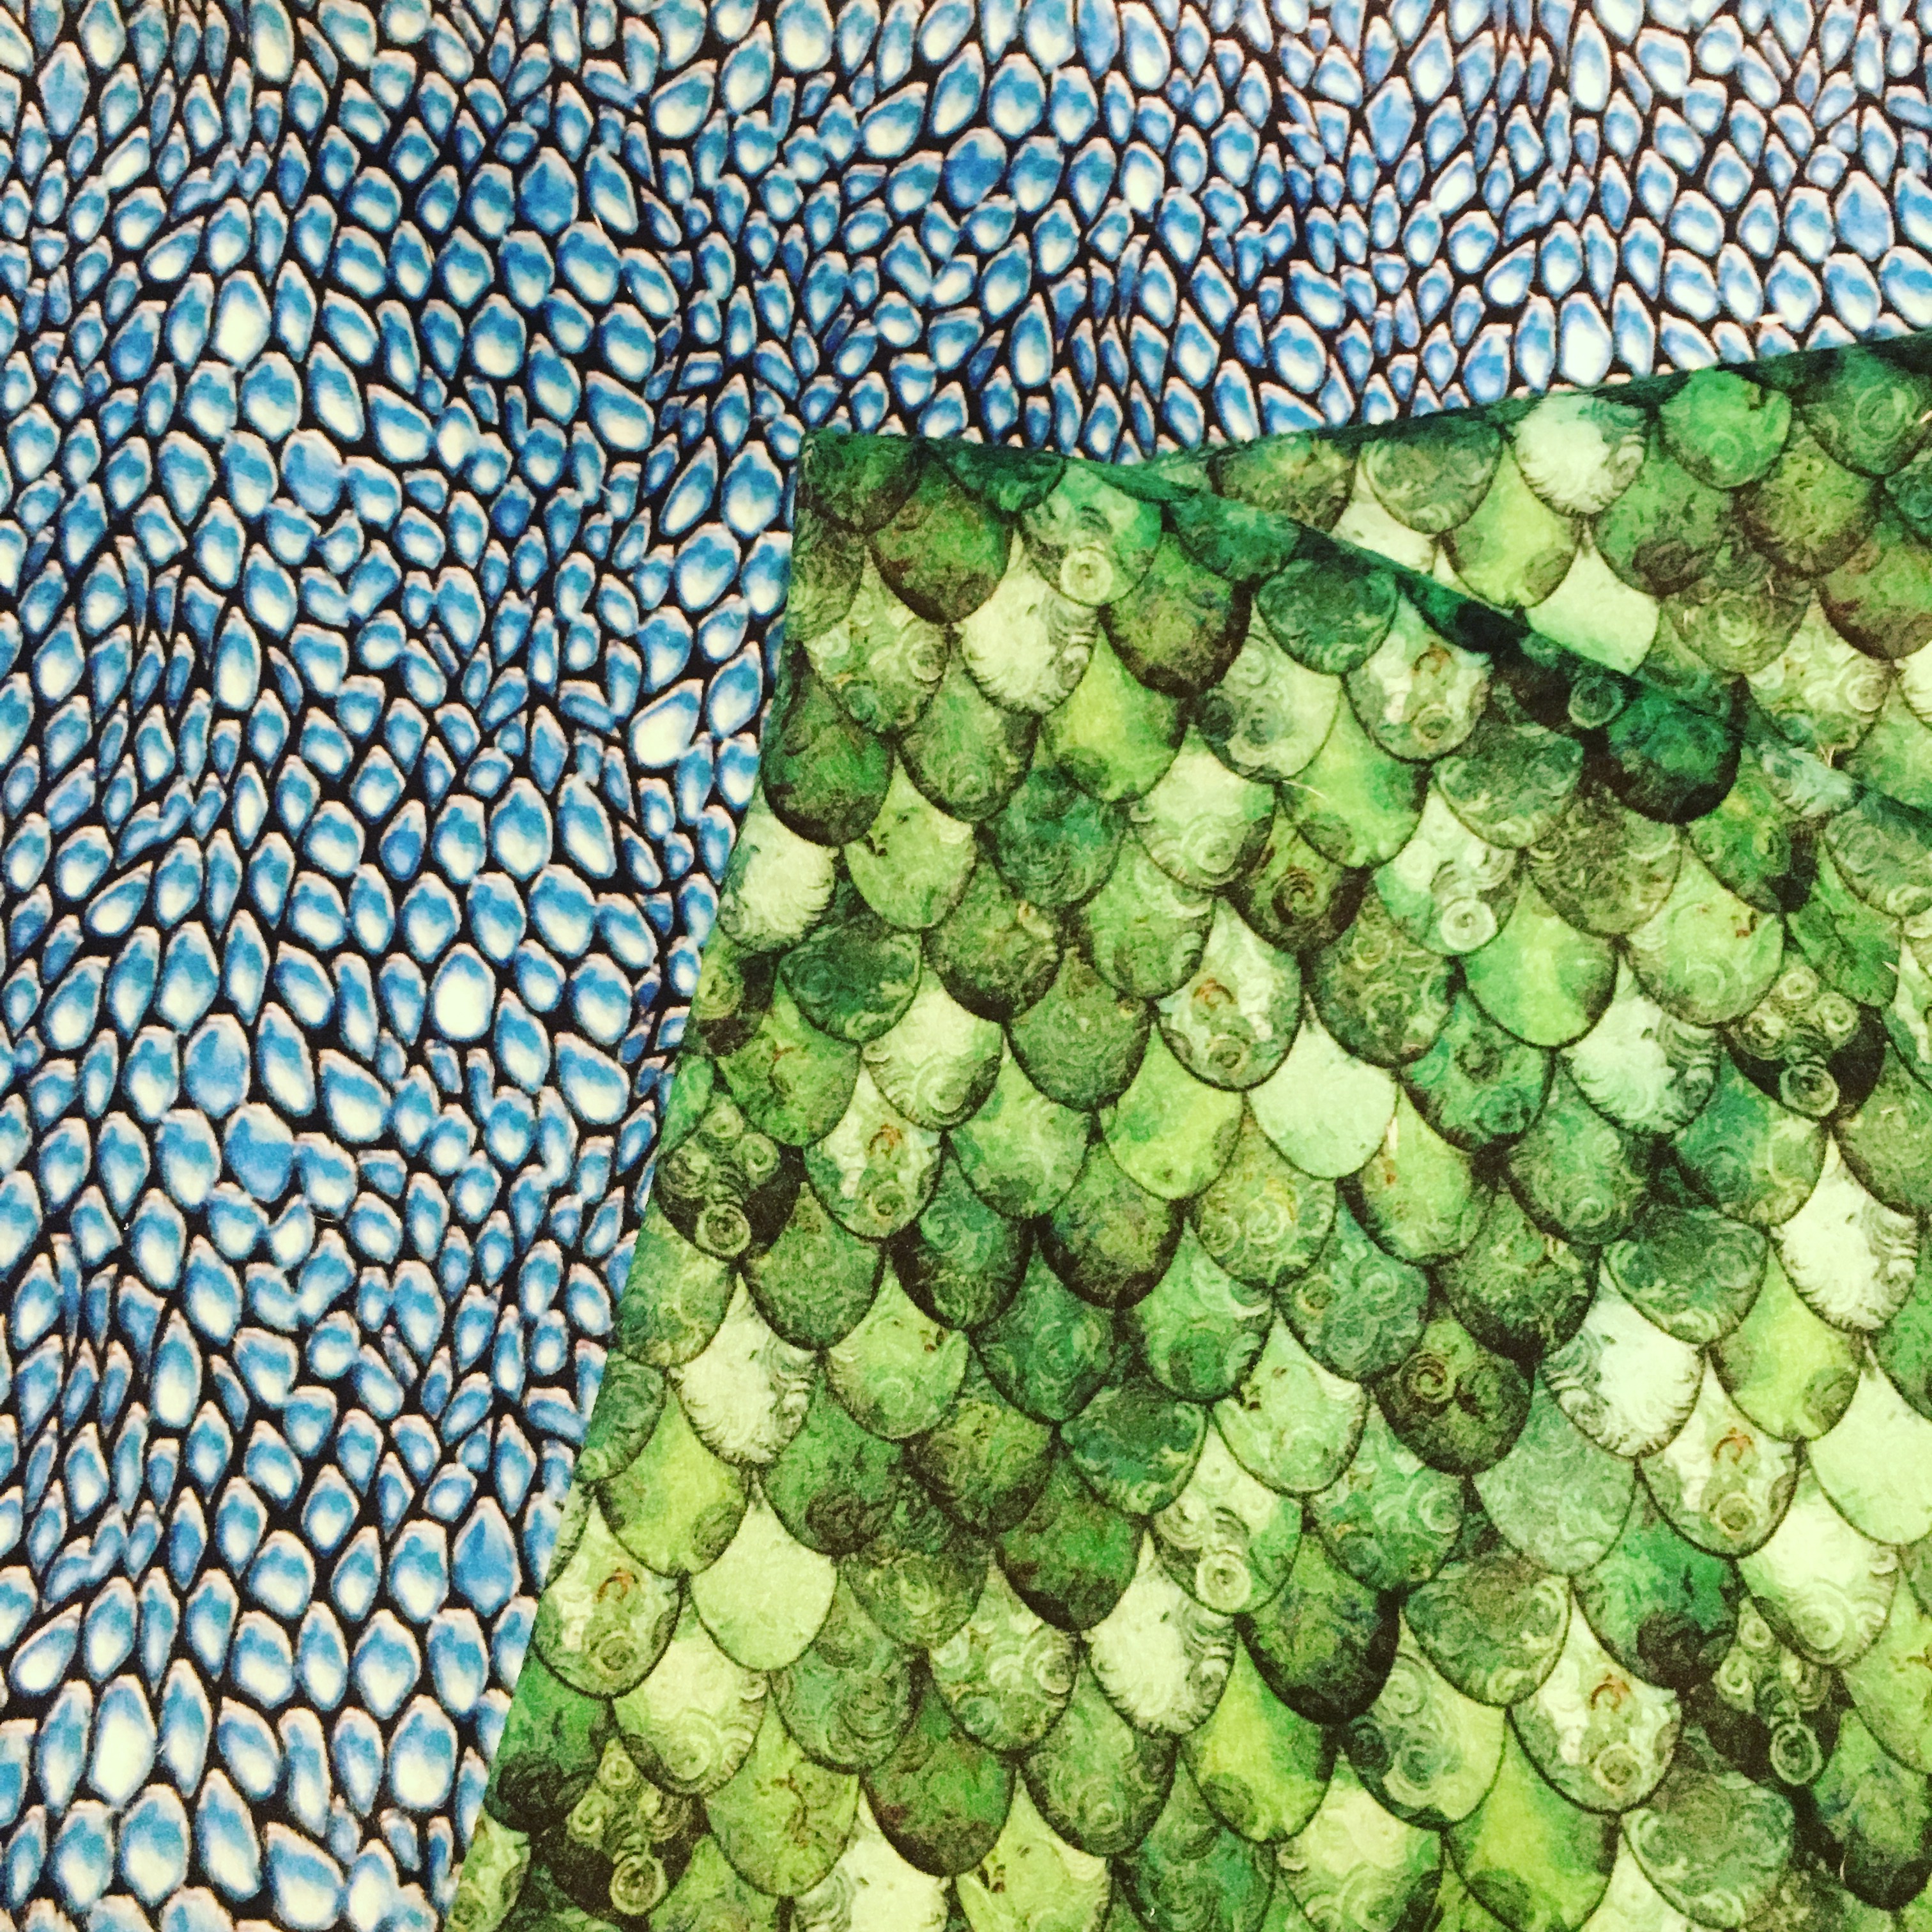 Image of two pieces of fabric, one light blue dragon scale print and one green mermaid scale print.